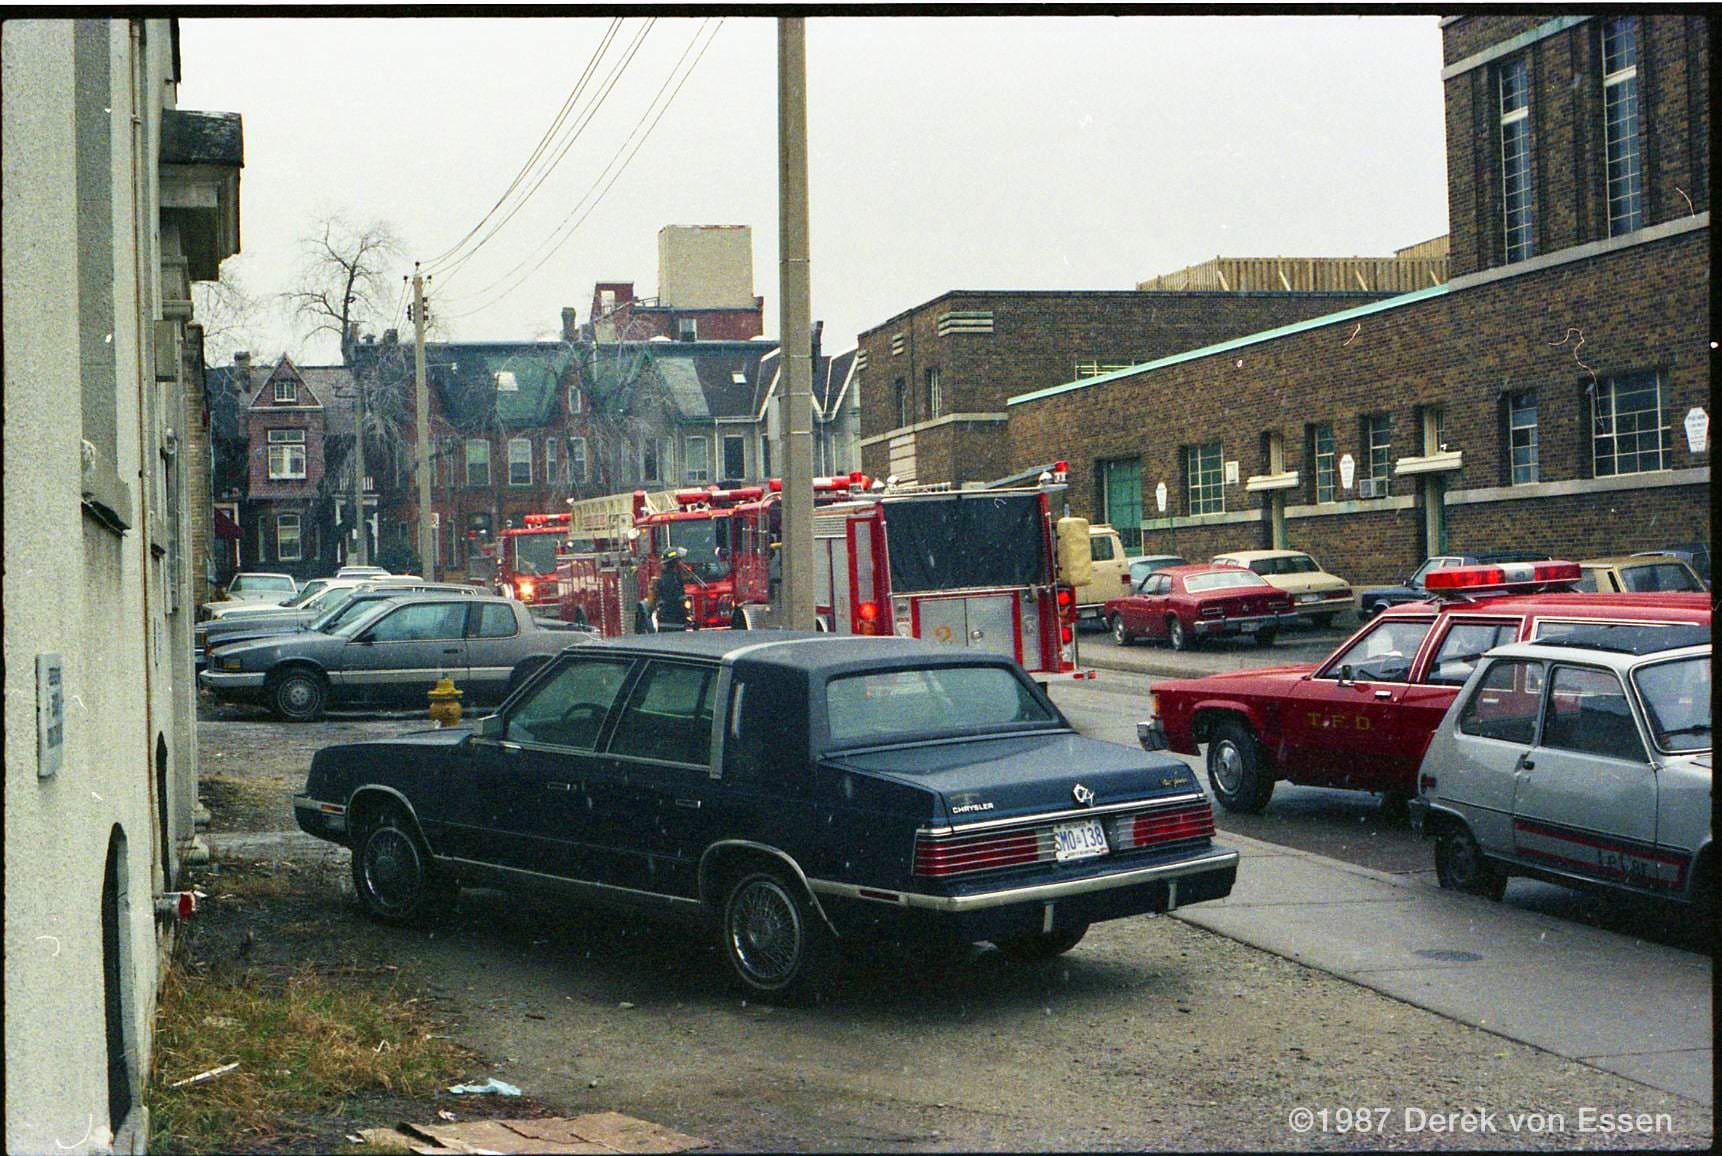 Emergency on Maud! Looking south towards Richmond in 1987.